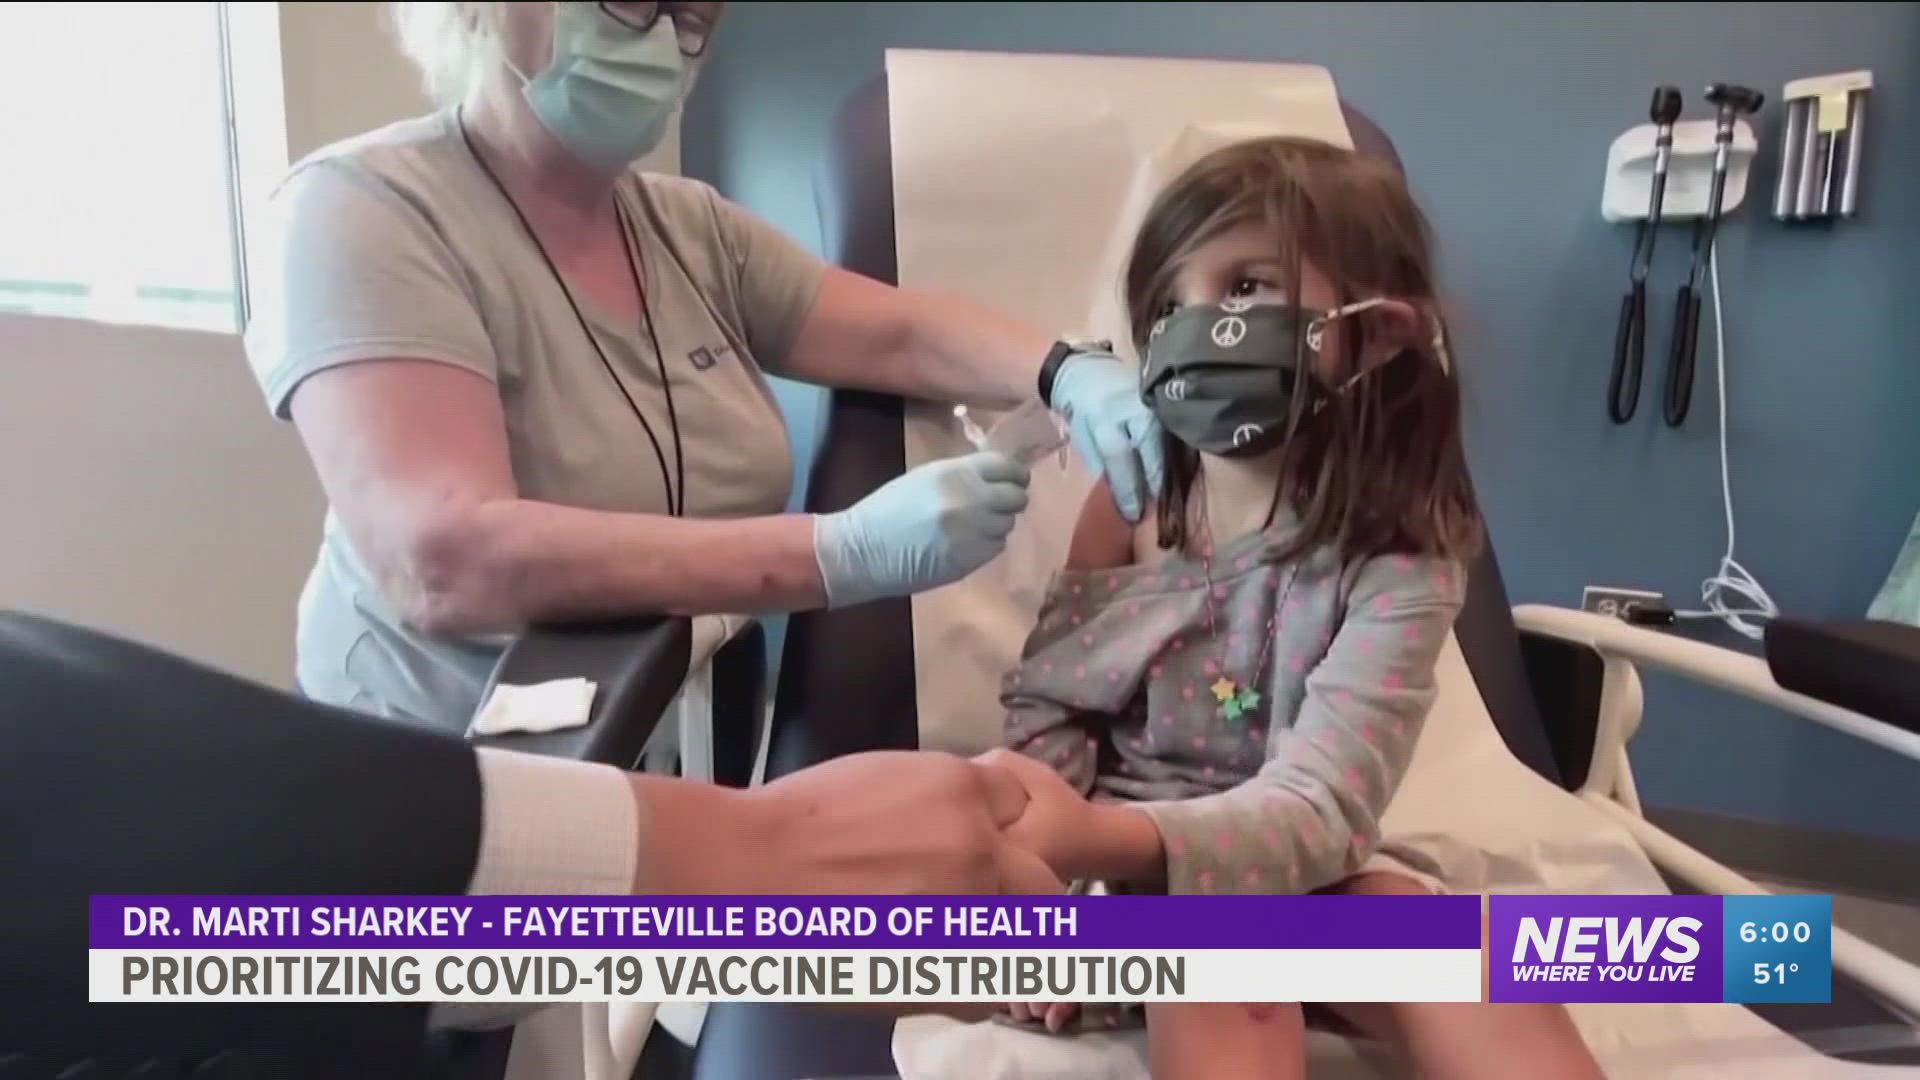 Pharmacies have begun administering COVID-19 vaccines for children and the vaccine rollout is explained by a pediatrician.